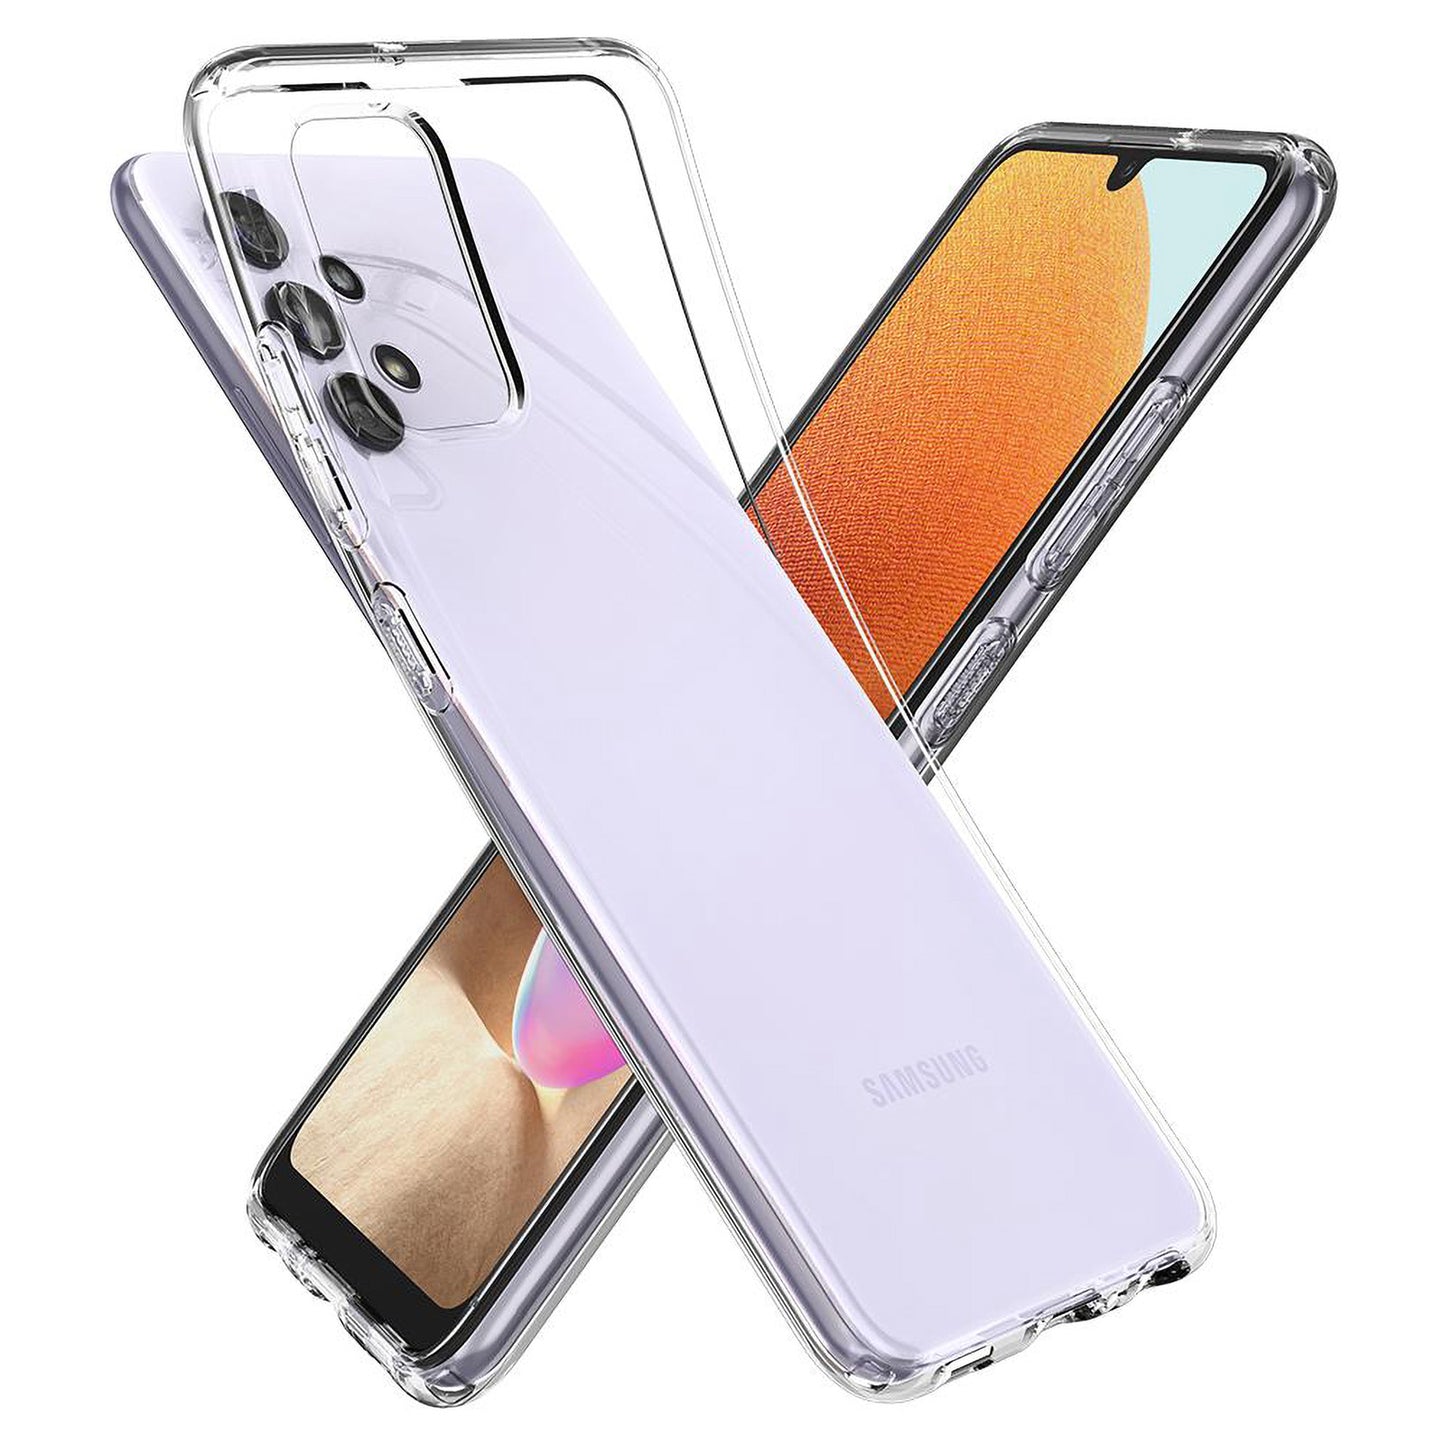 MEZON Galaxy A32 4G Ultra Slim Crystal Clear Premium TPU Gel Back Case – Shock Absorption, Wireless Charging Compatible